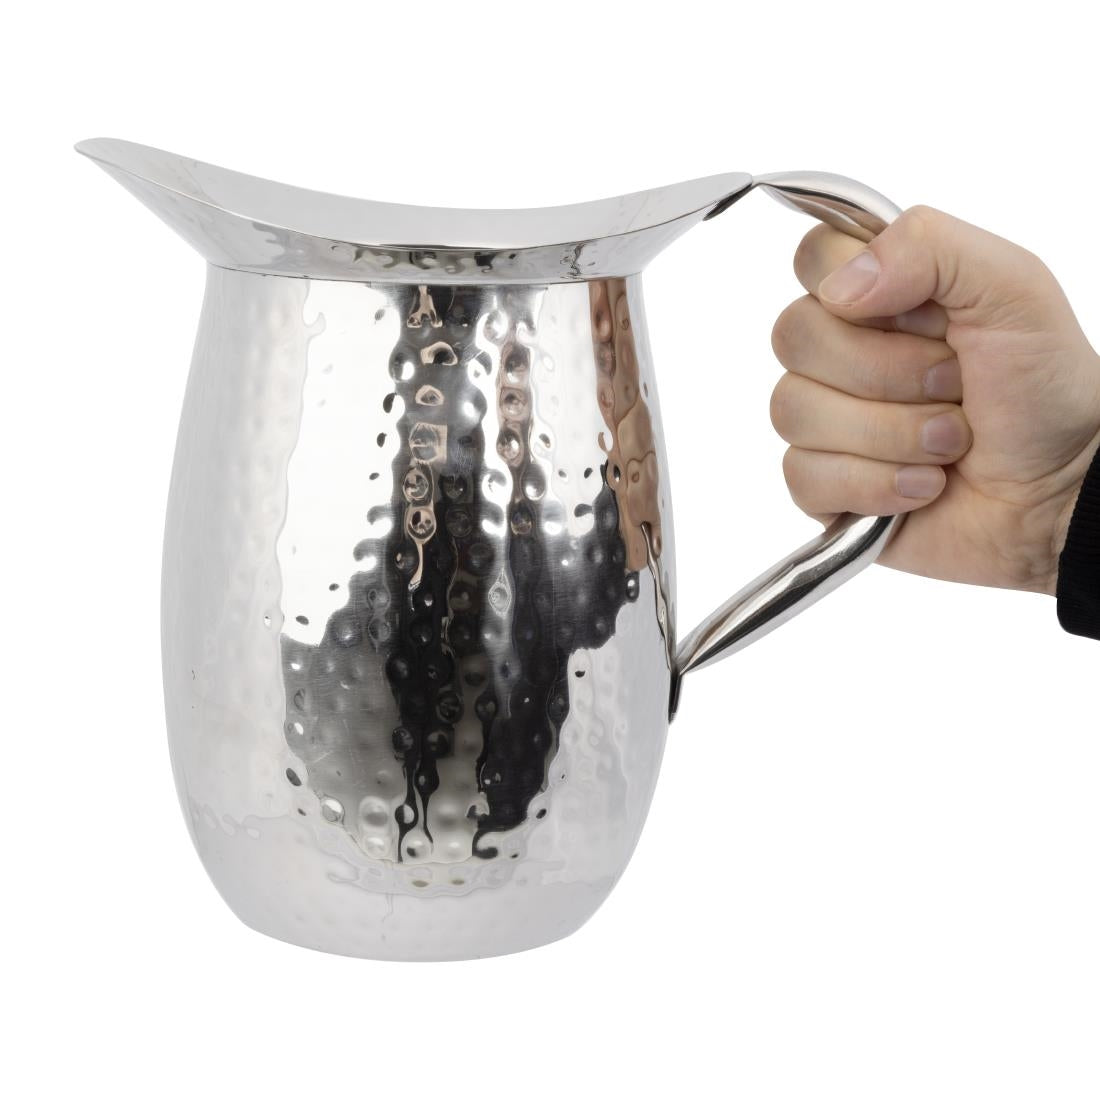 FU286 Olympia Hammered Pitcher 2Ltr